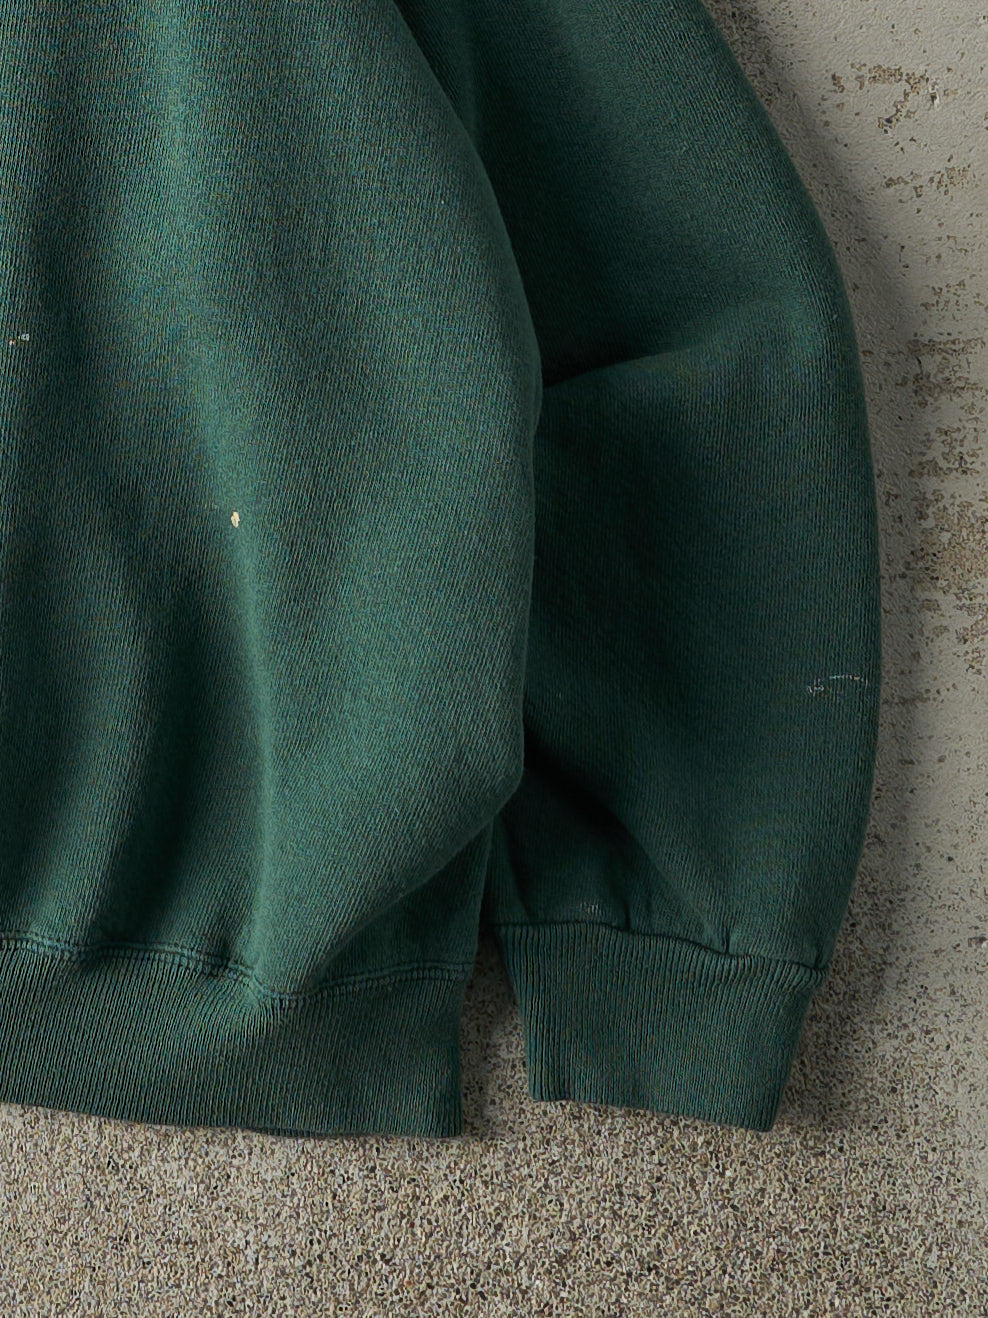 Vintage 90s Green Paint Stained Blank Crewneck (S)